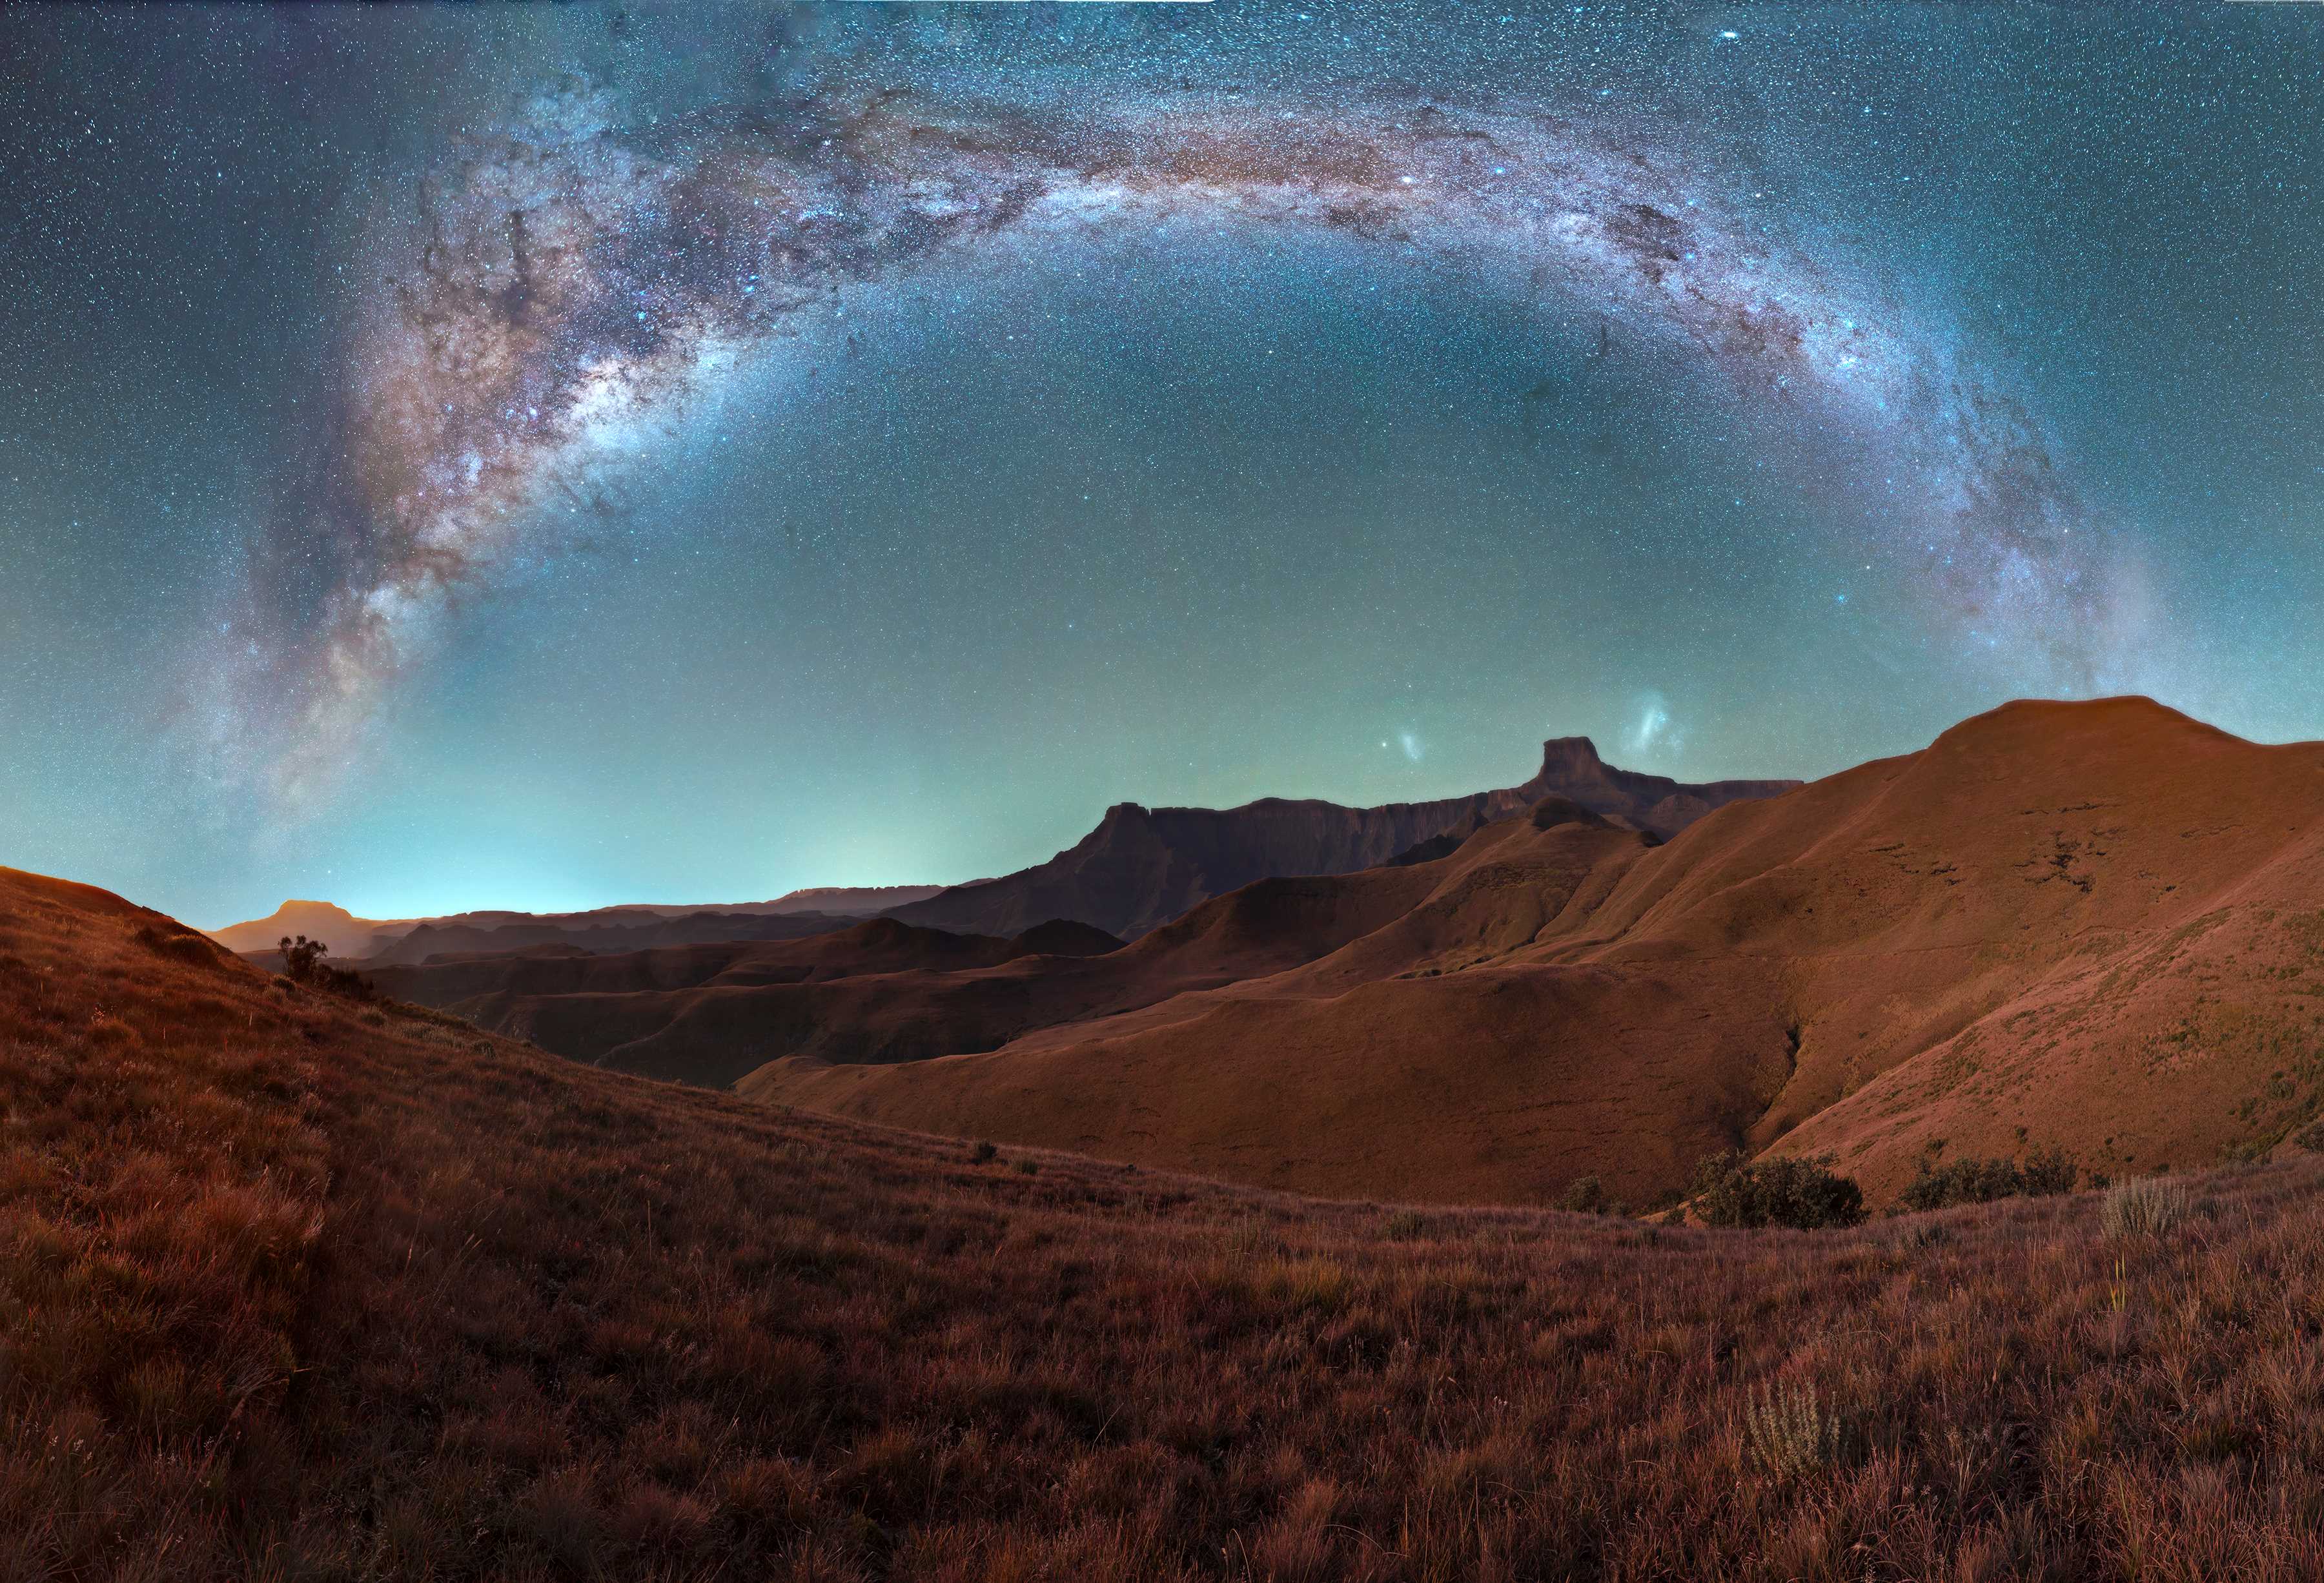 Photogragh by Patricia S.  Workley of Way Pano over the Drakensberg Mountains South Africa 